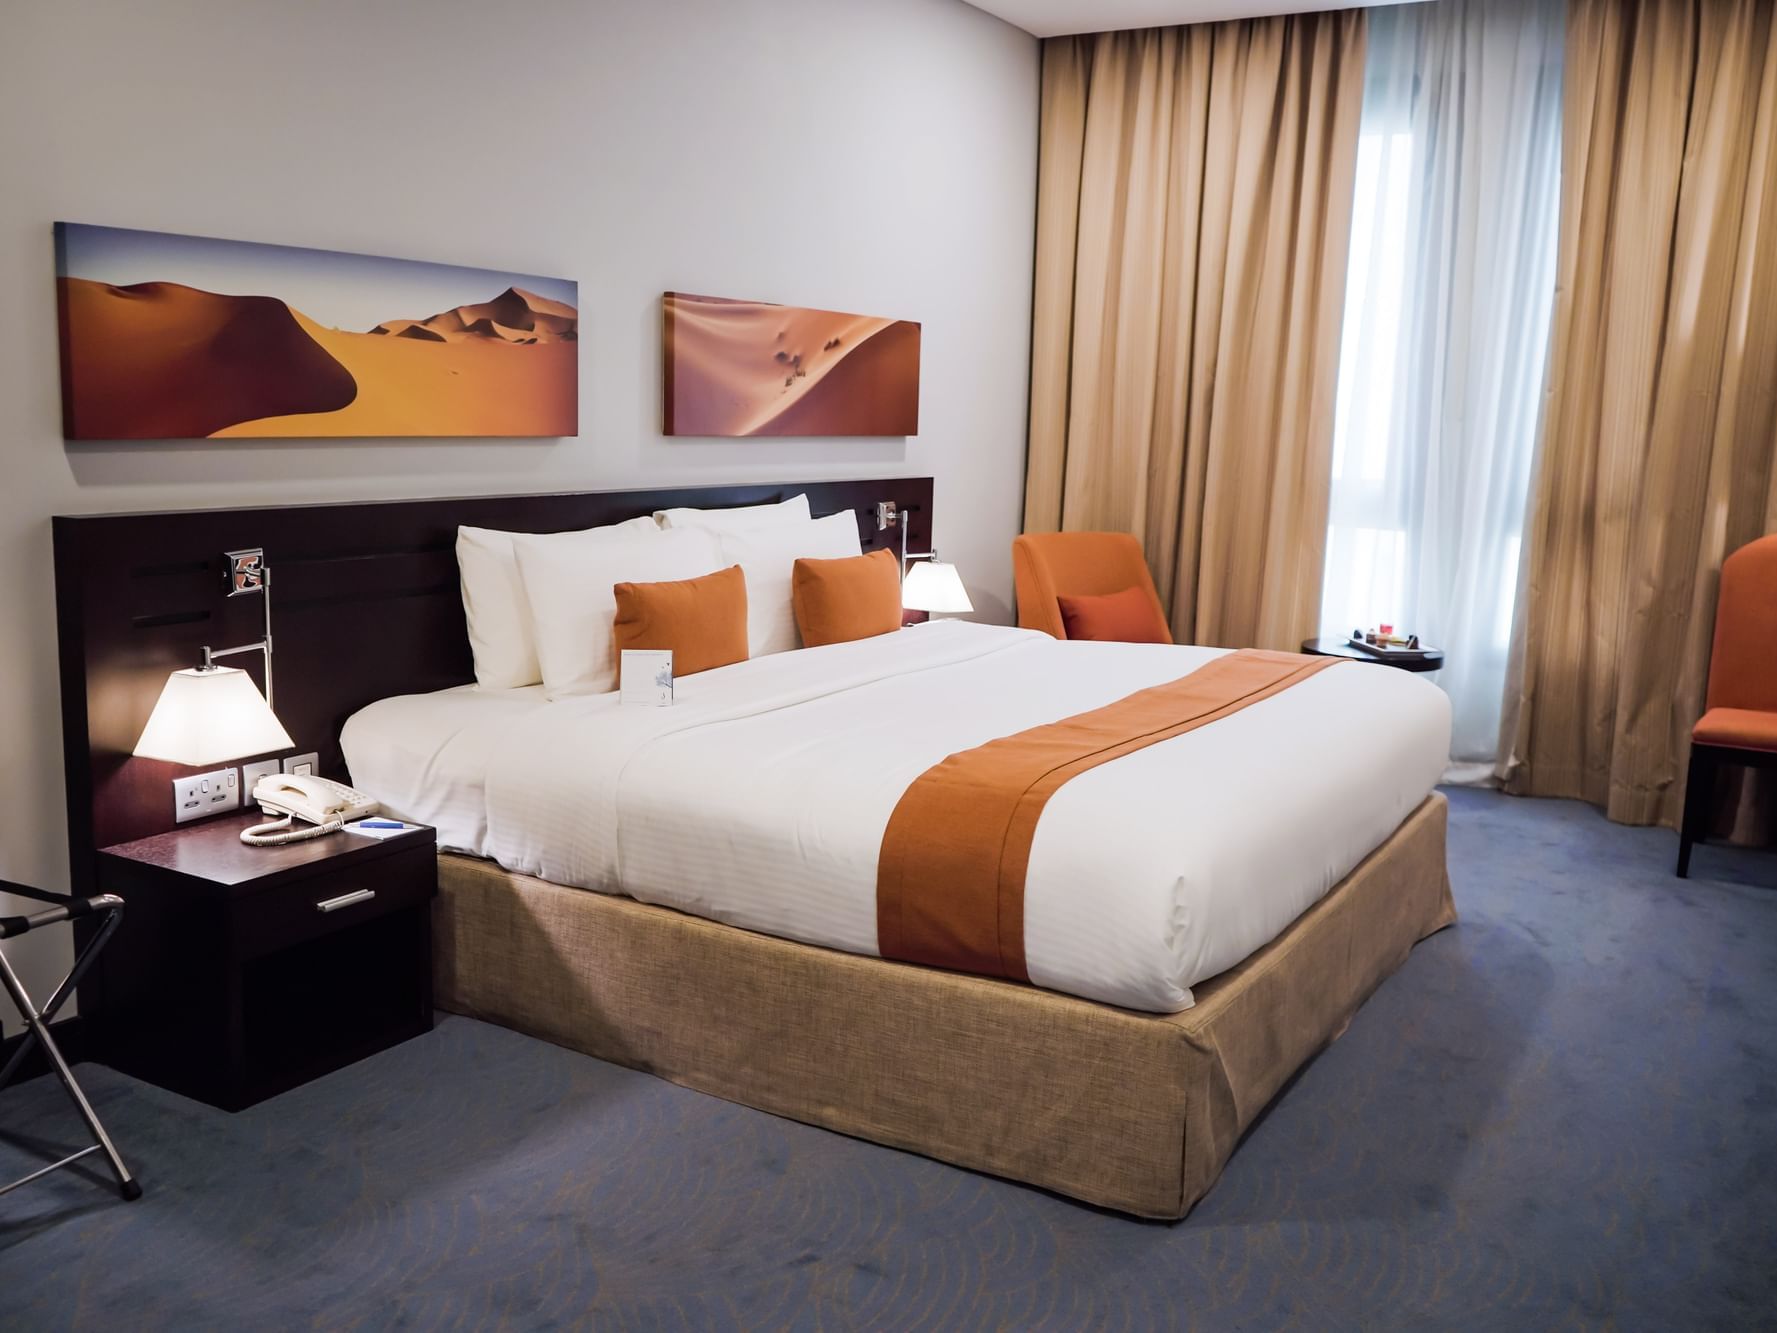 Cozy bed & nightstand in Superior Room at City Seasons Hotels